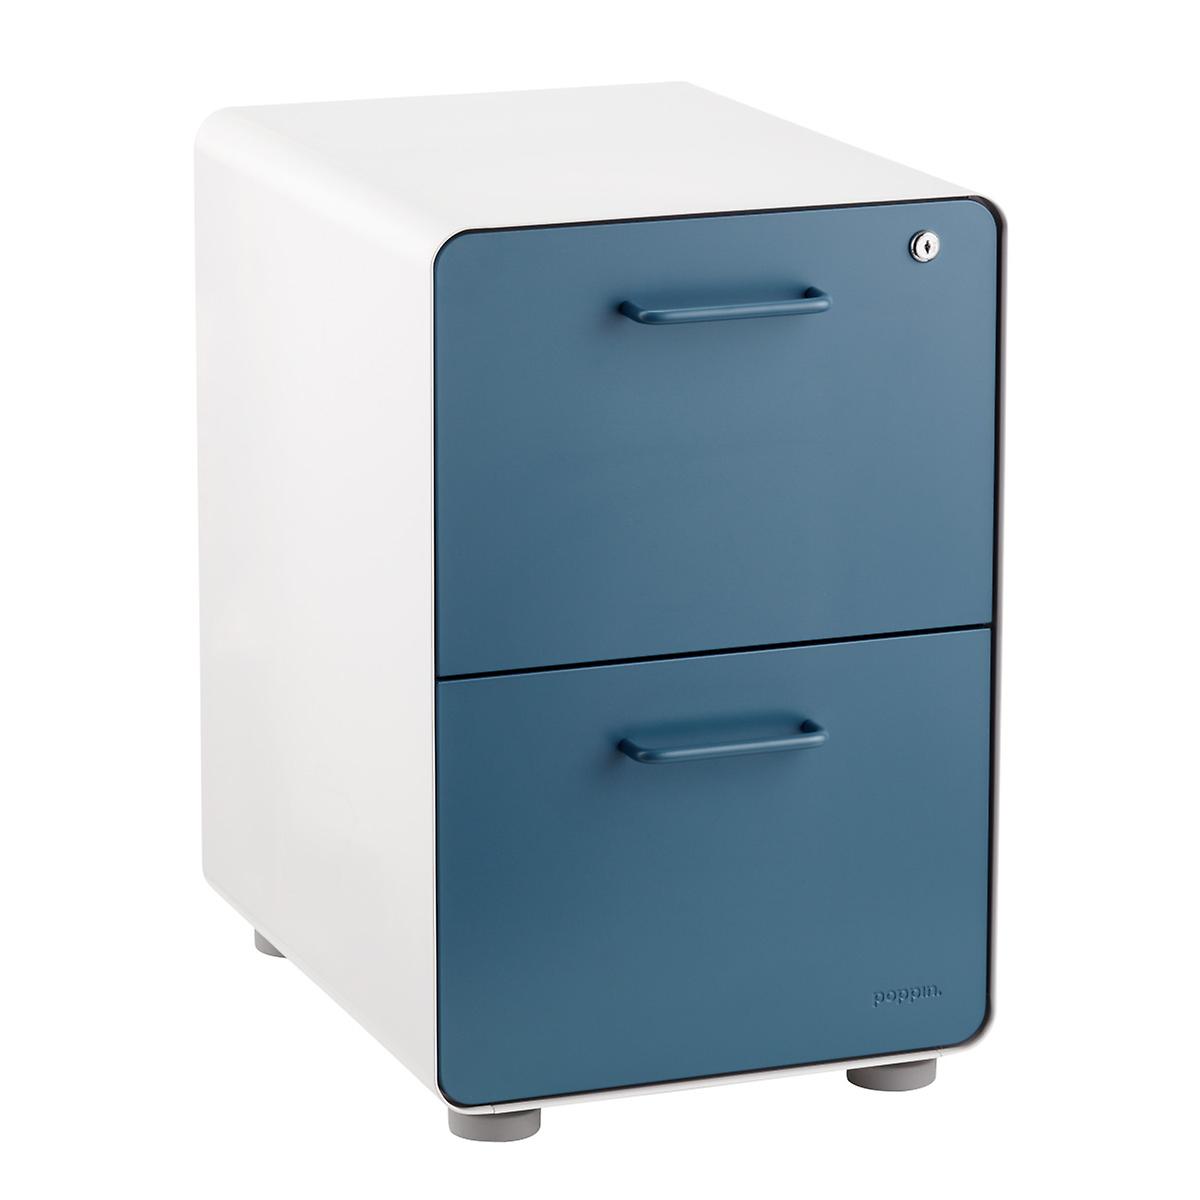 Poppin Slate Blue 2 Drawer Stow Locking Filing Cabinet The